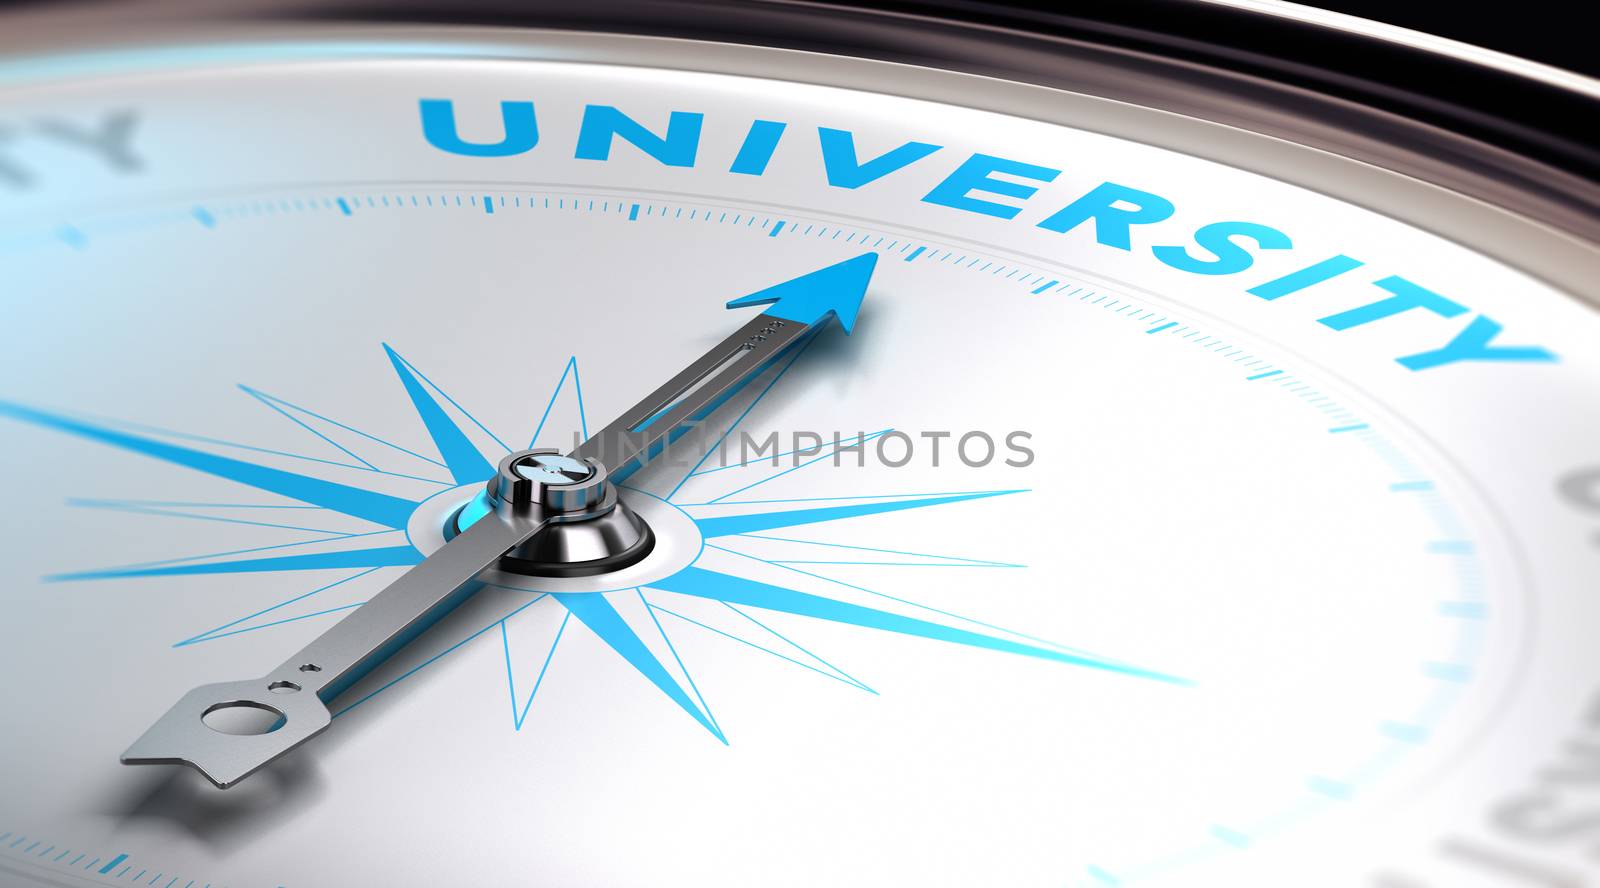 Choosing an university concept. 3D image with a compass with needle pointing the word university. Blue and white tones.